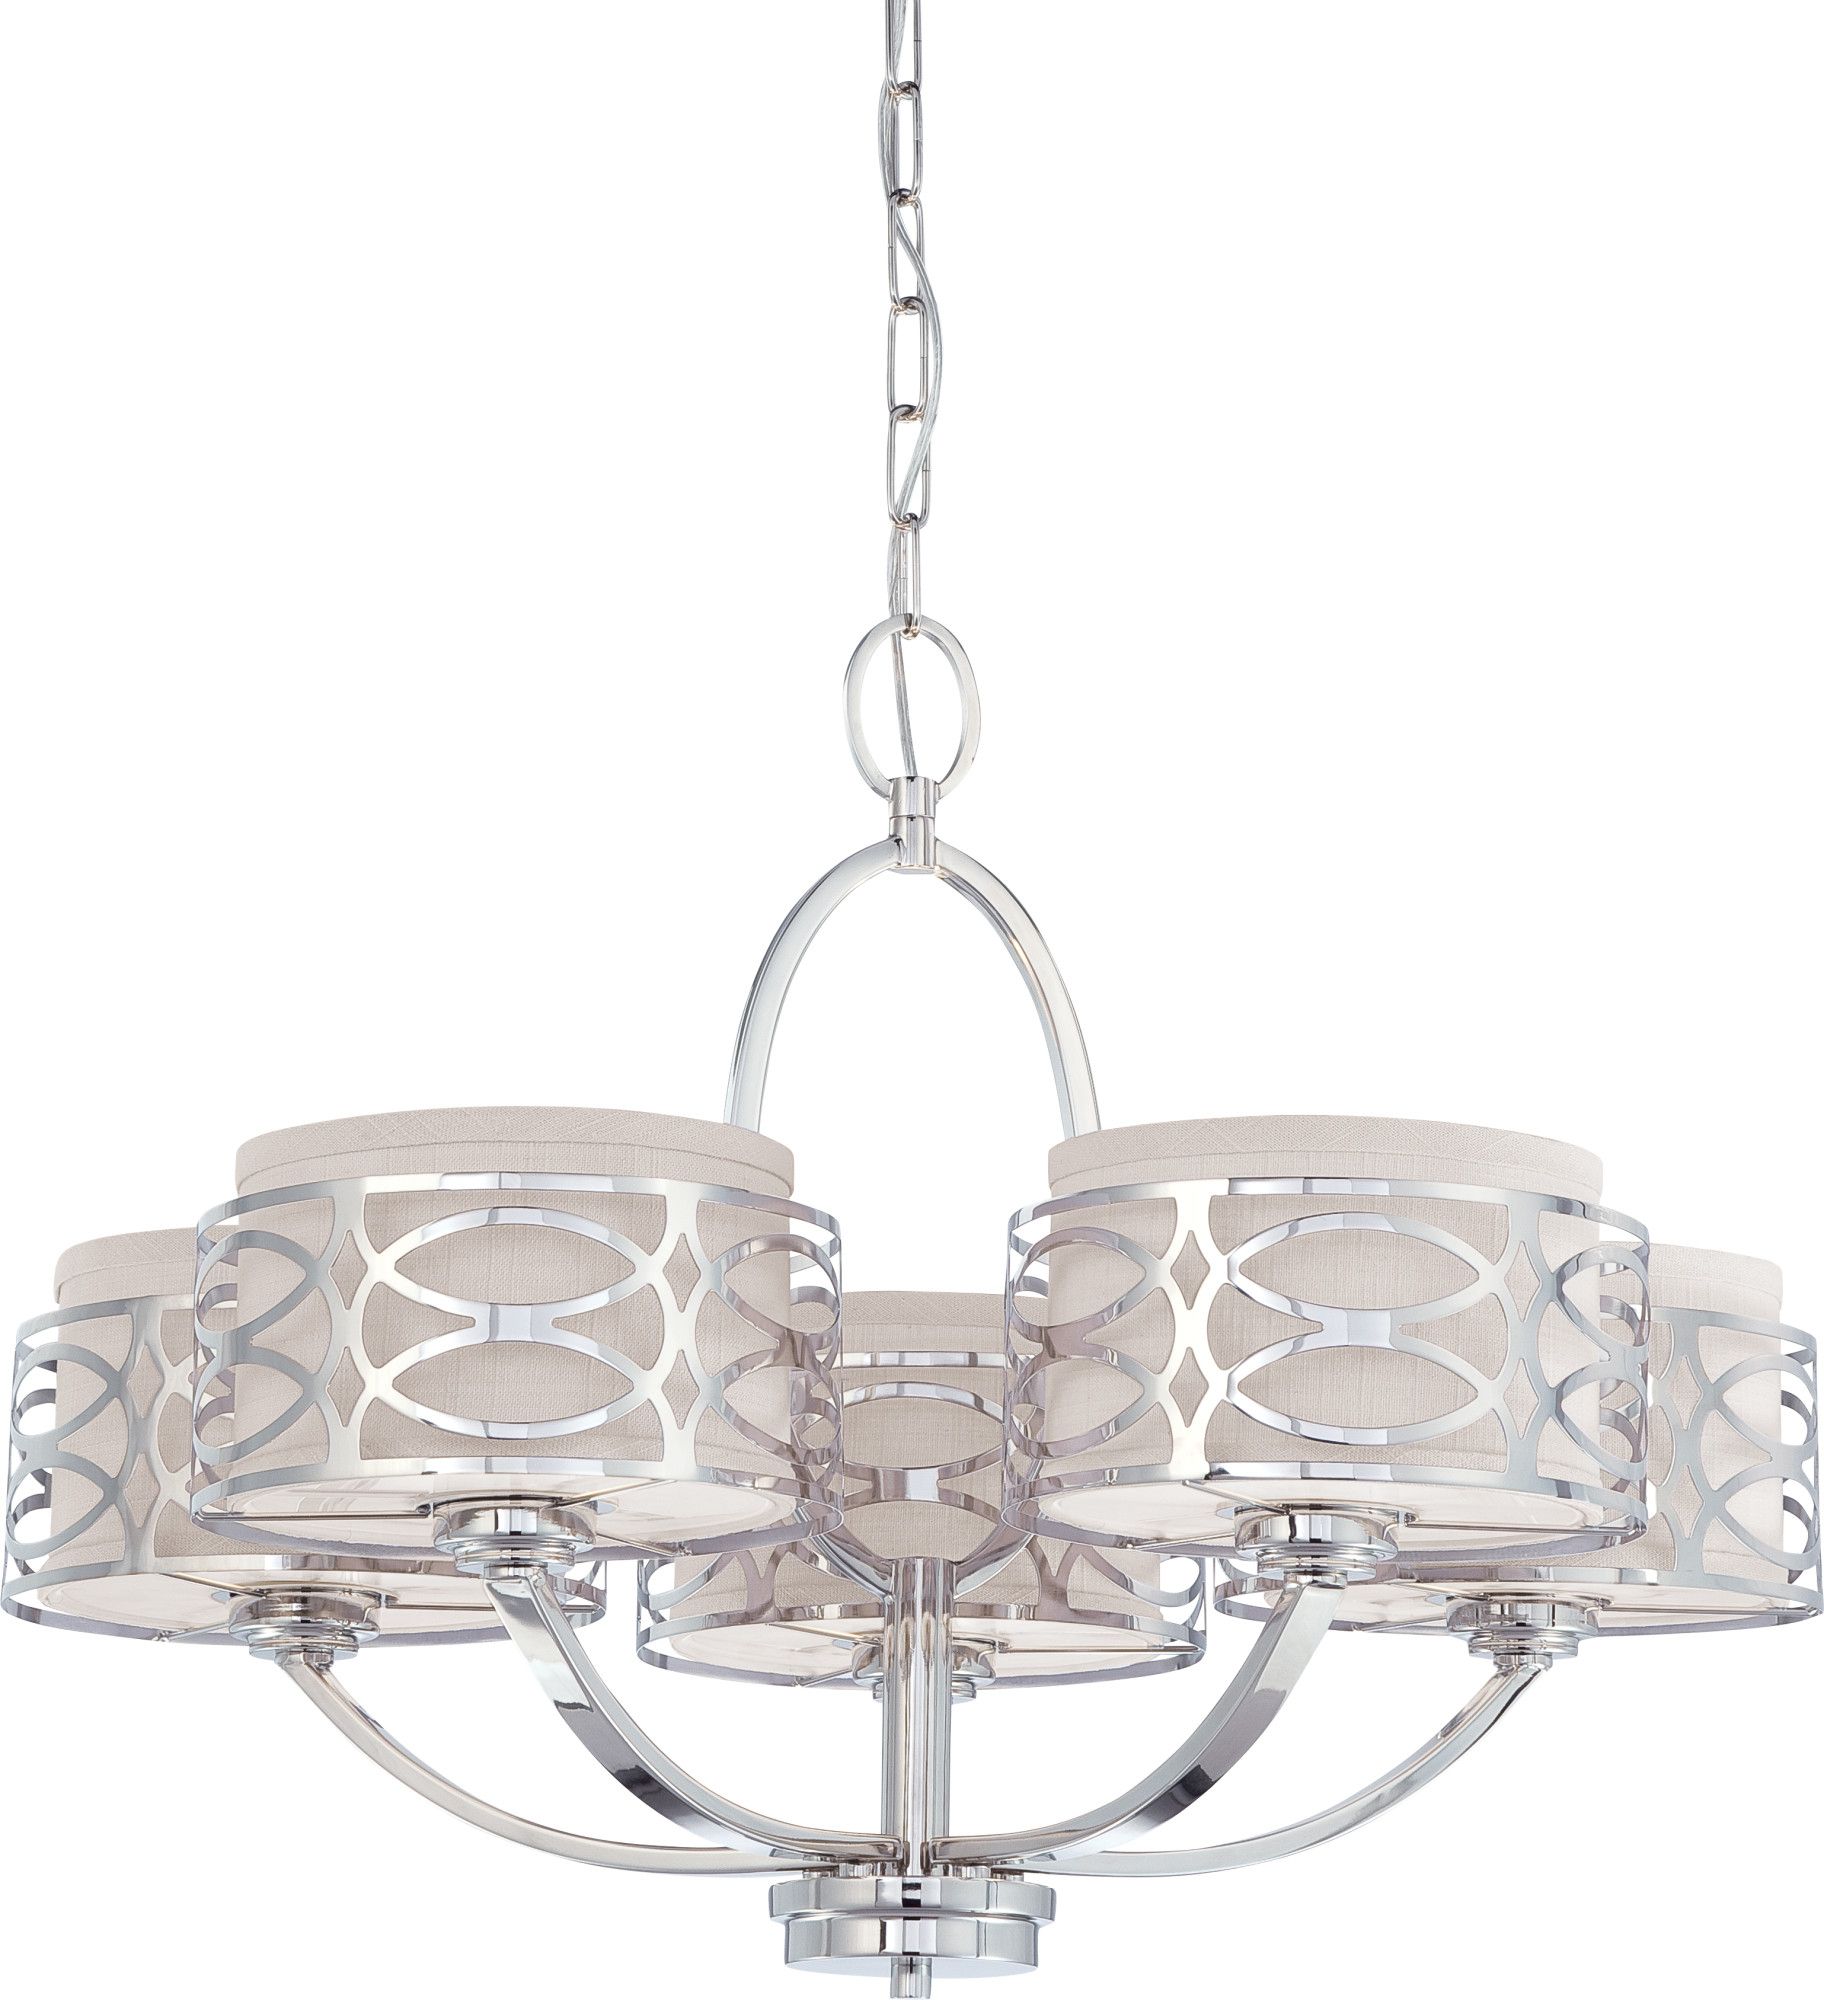 Stone Gray And Nickel Chandeliers In Most Current 5 Light – Chandelier – Slate Gray Fabric Shades – Walmart (View 16 of 20)